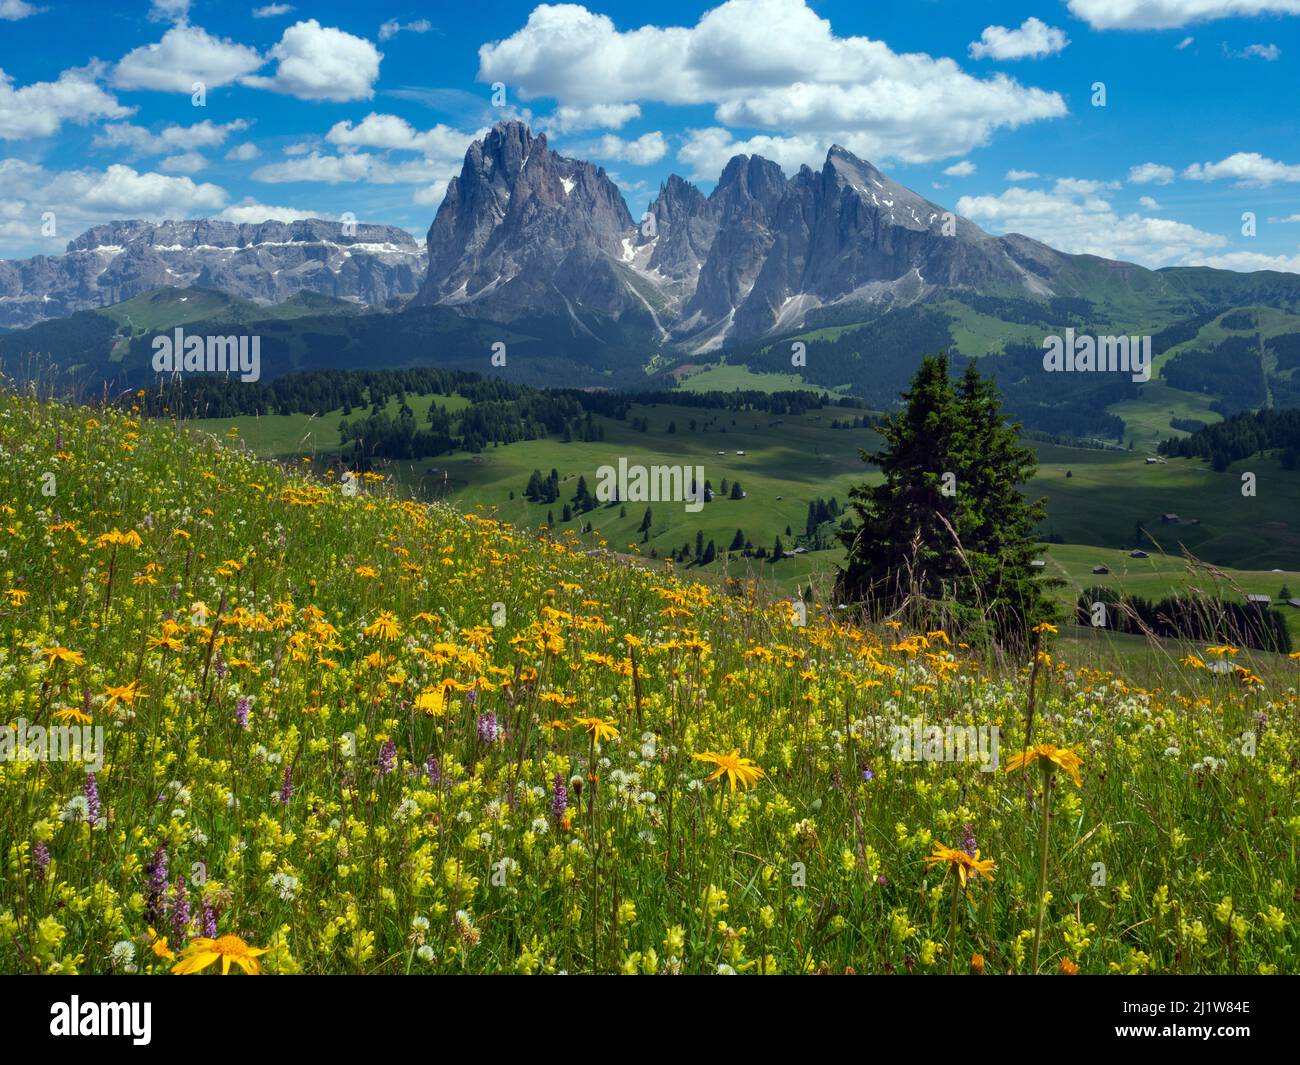 Alpine flower meadow landscape - Seiser Alm with mountains of Langkofel Group in the background. Dolomoites, South Tyrol, Italy. July 2019. Stock Photo